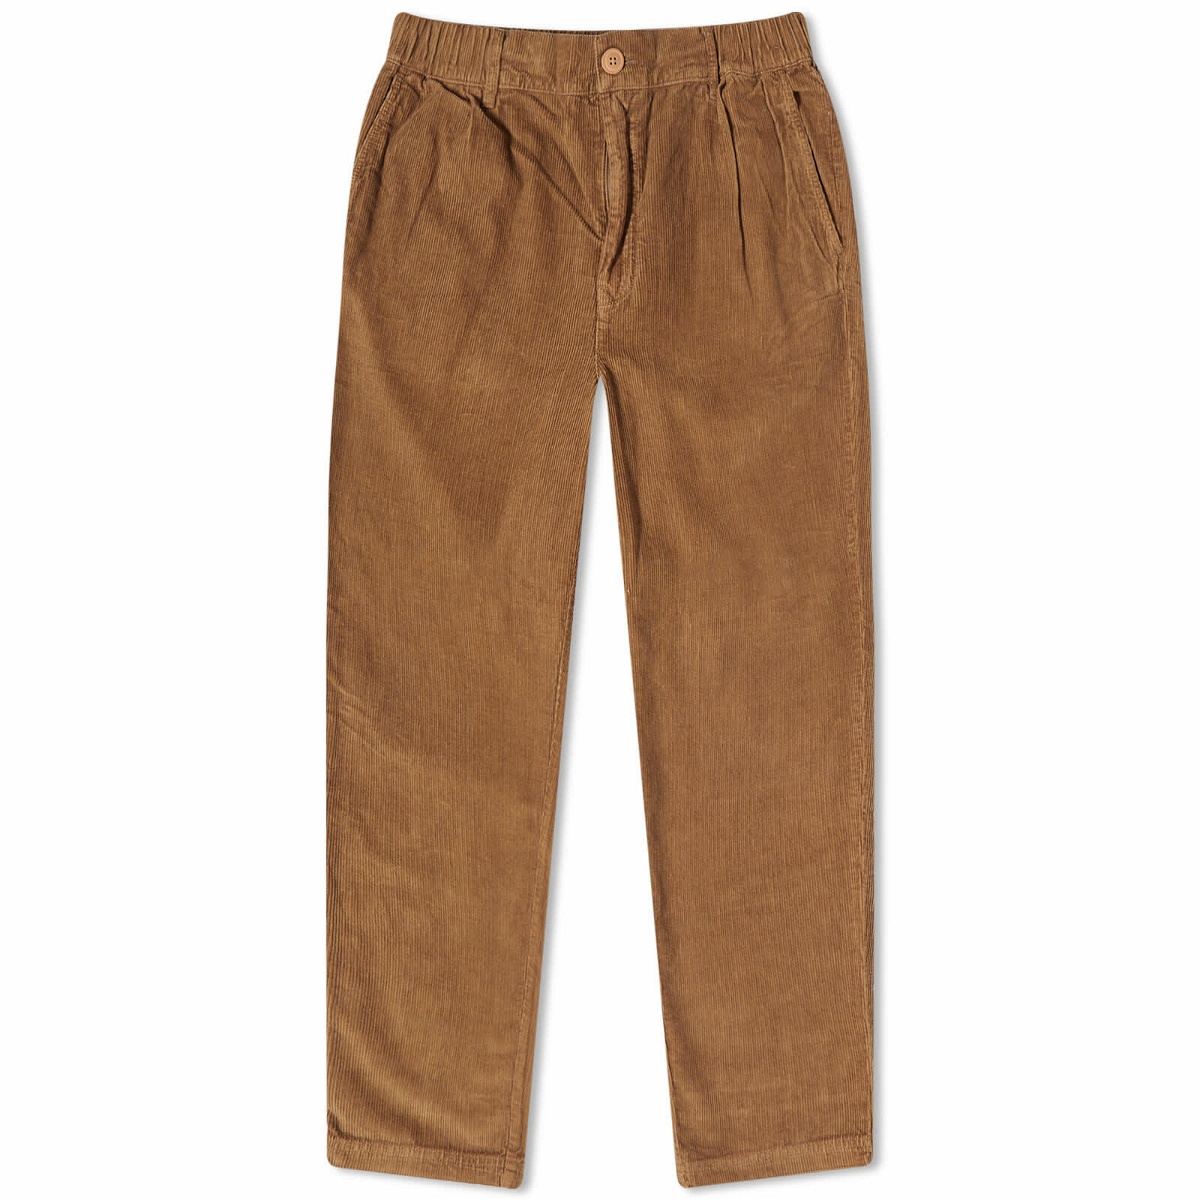 Barbour Men's Highgate Cord Trouser in Stone Barbour